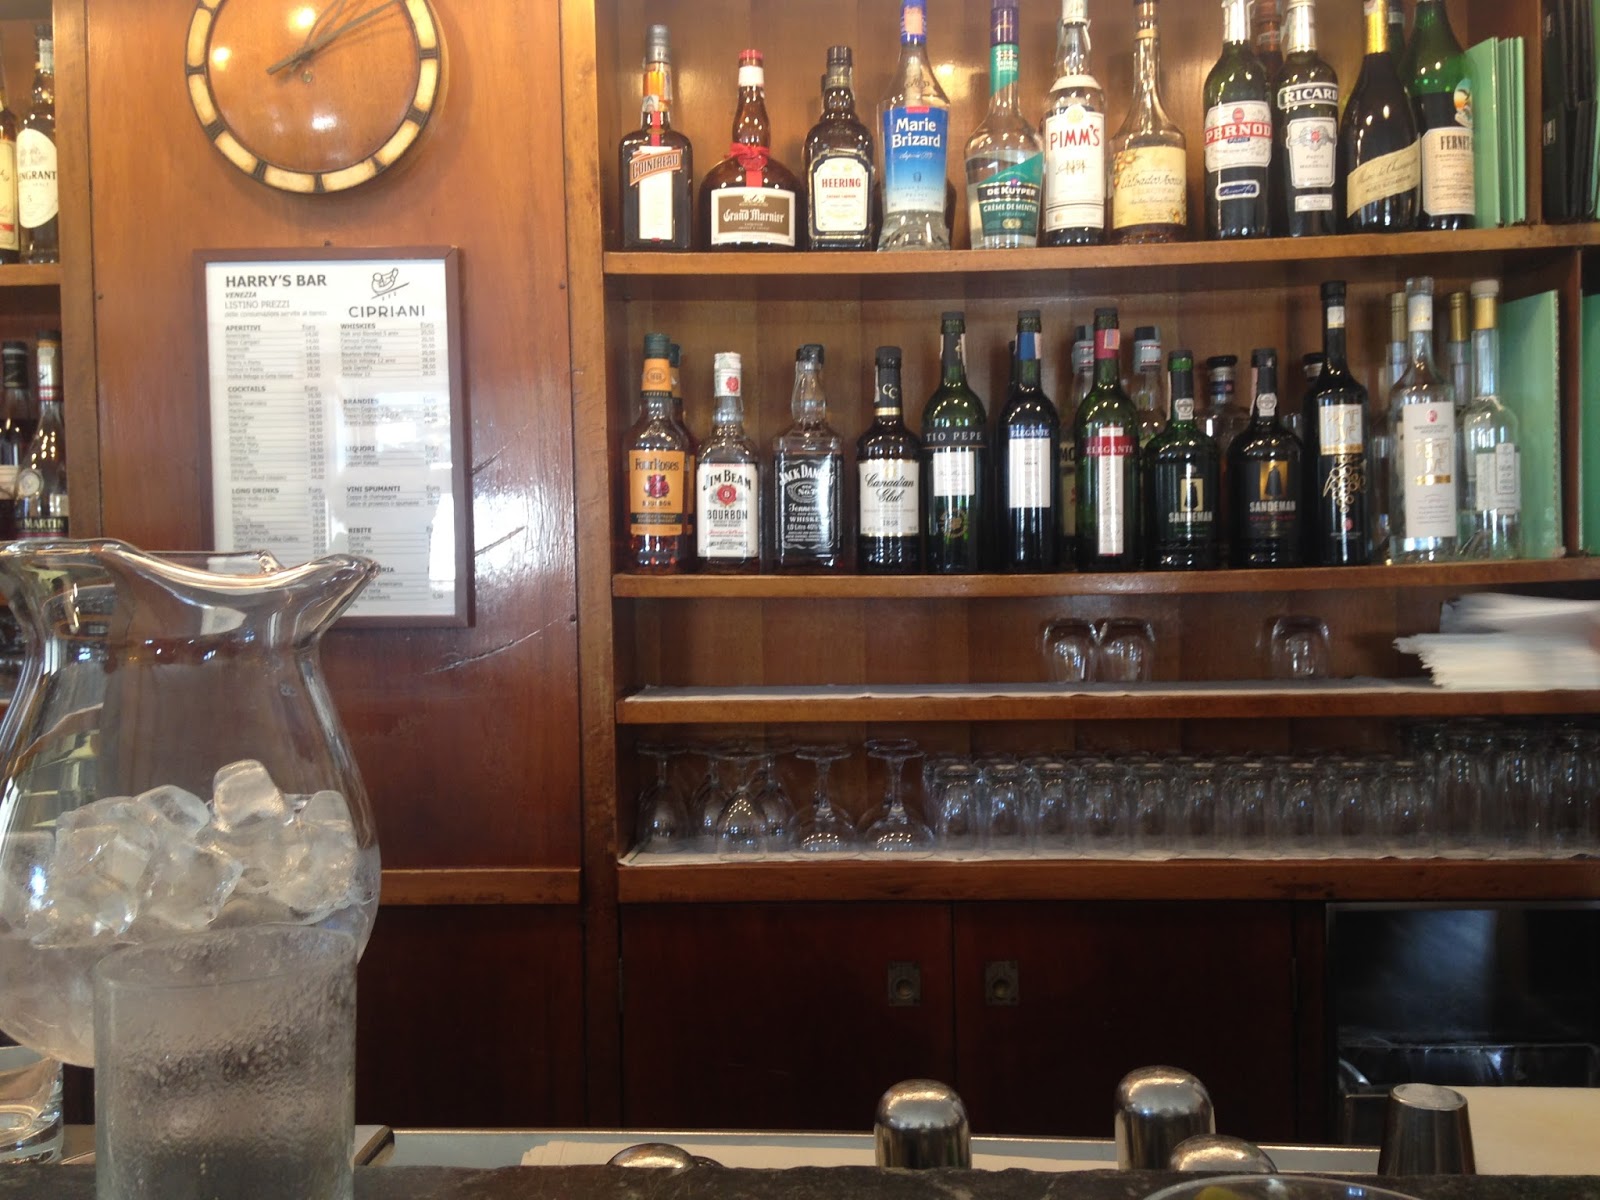 Lessons from the Historic Harry's Bar in Venice